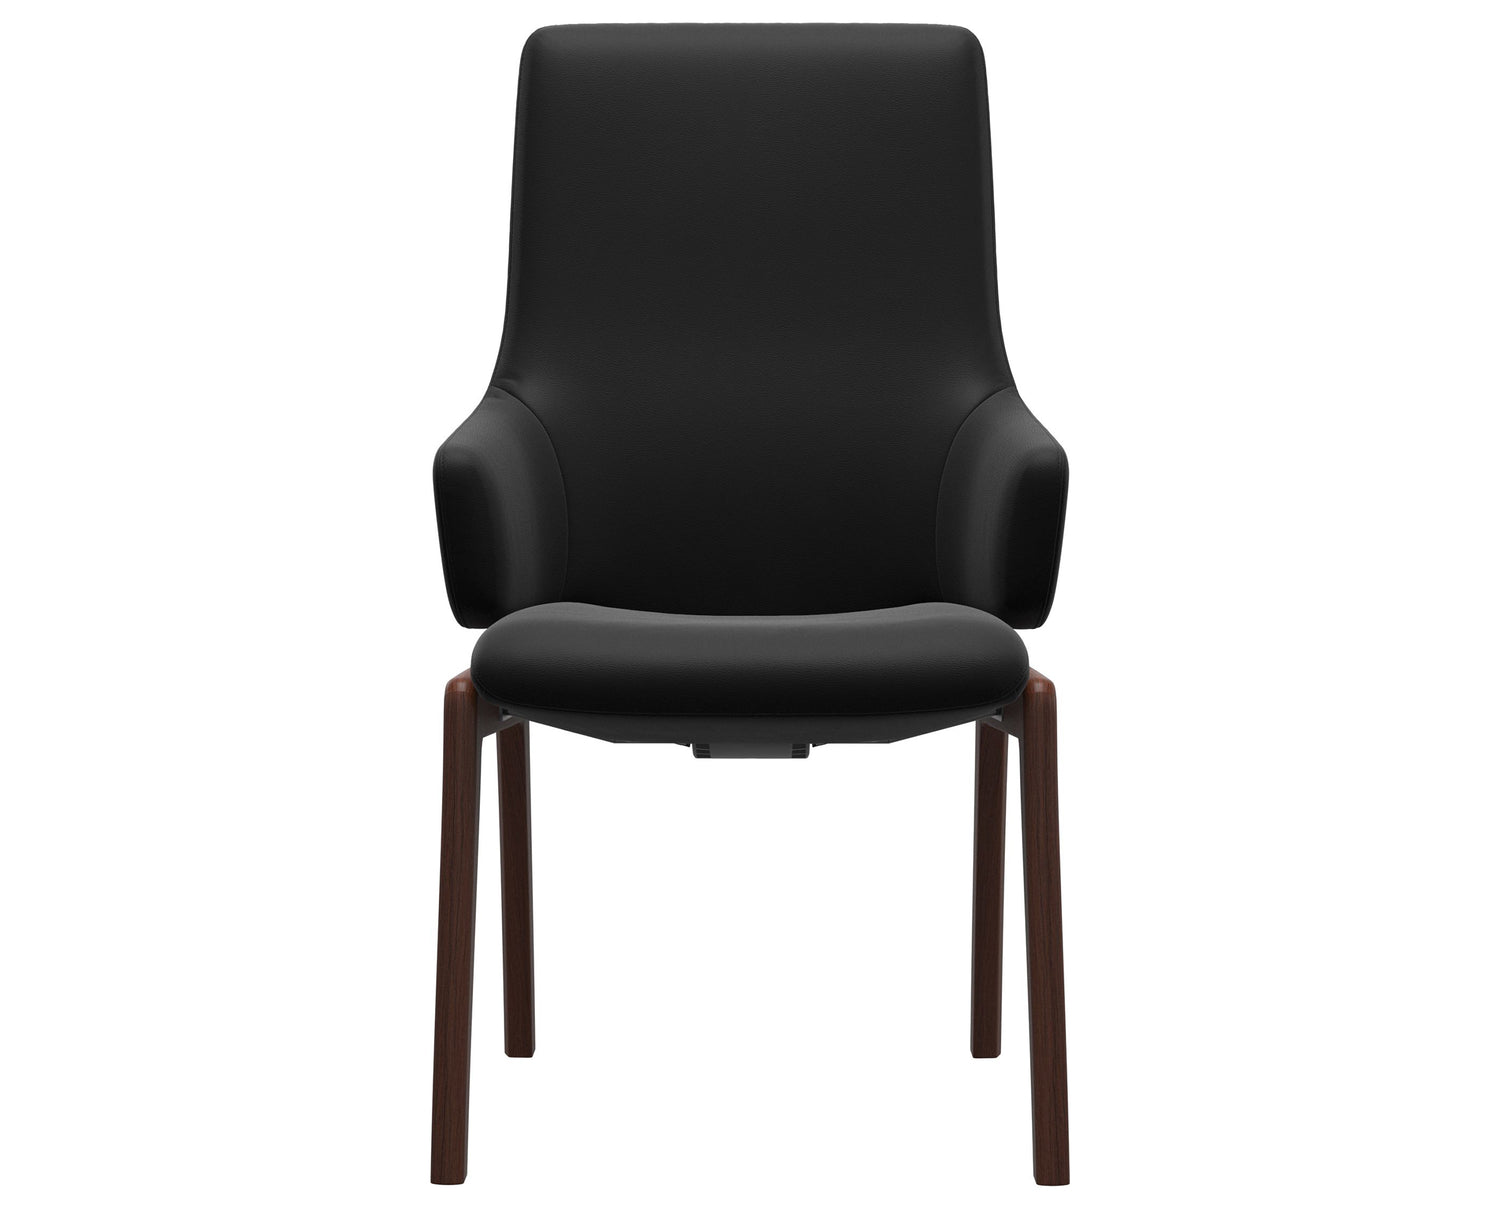 Paloma Leather Black & Walnut Base | Stressless Laurel High Back D100 Dining Chair w/Arms | Valley Ridge Furniture